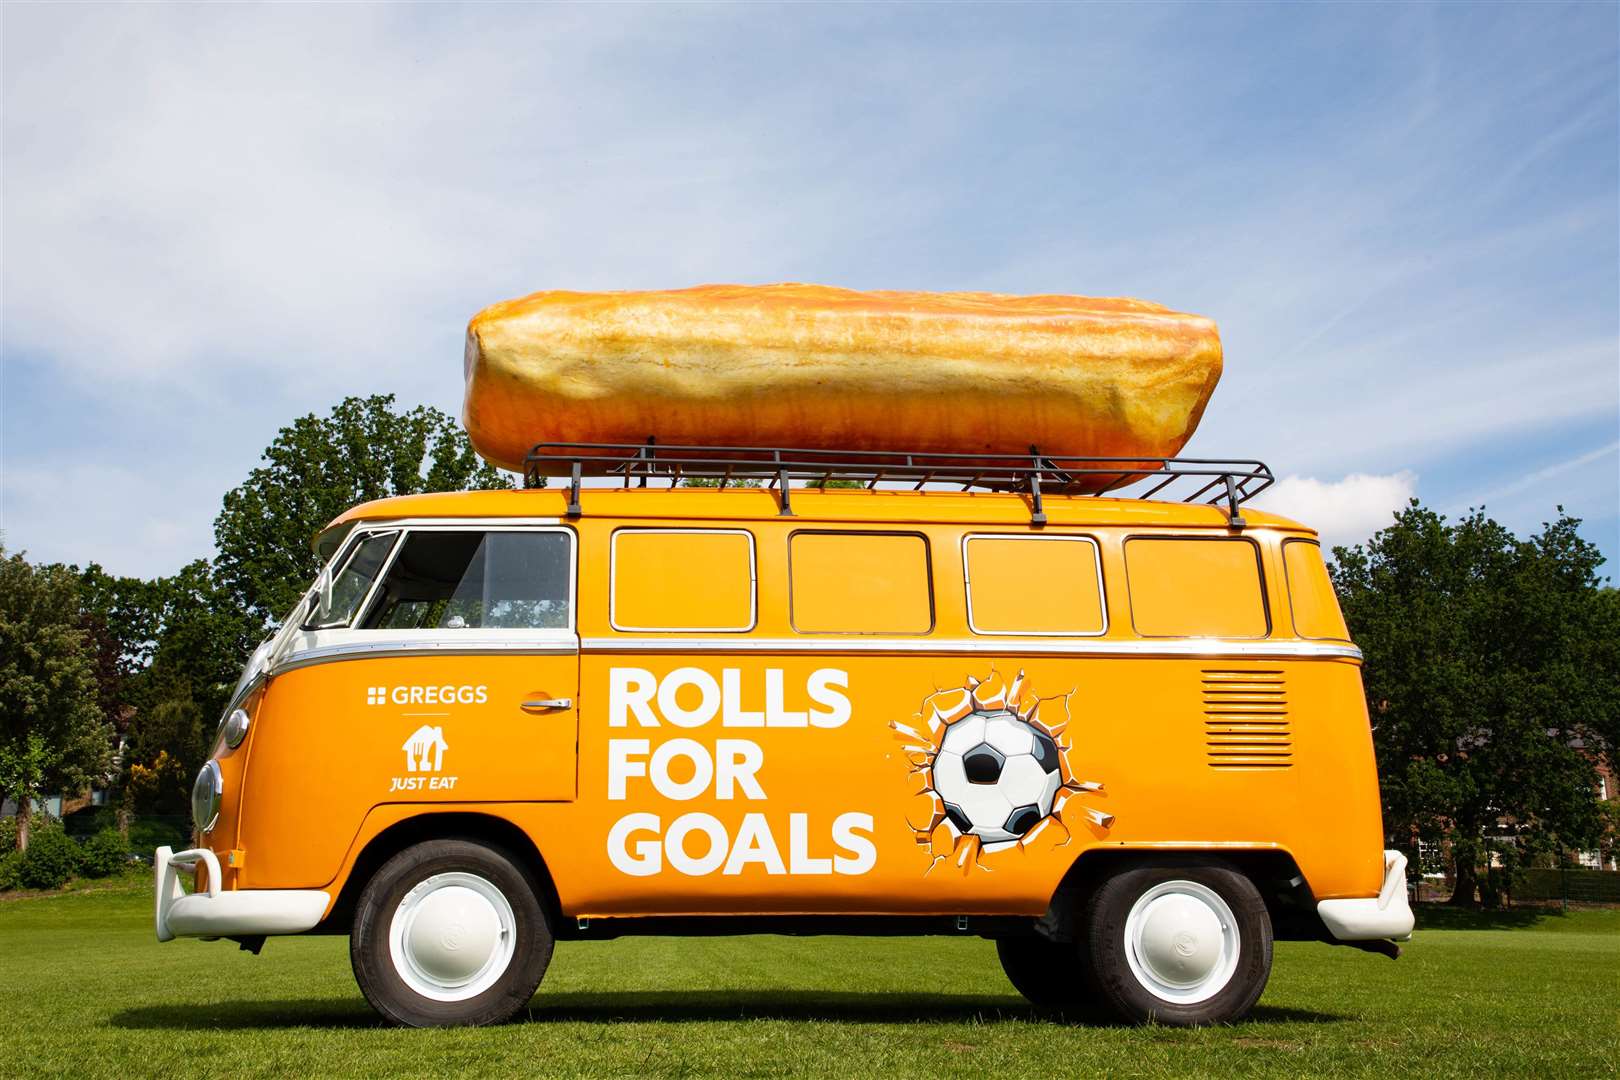 Just Eat and Greggs have teamed up to offer free sausage rolls for Euro2020 goals scored on UK soil. Photo credit: David Parry/PA Wire